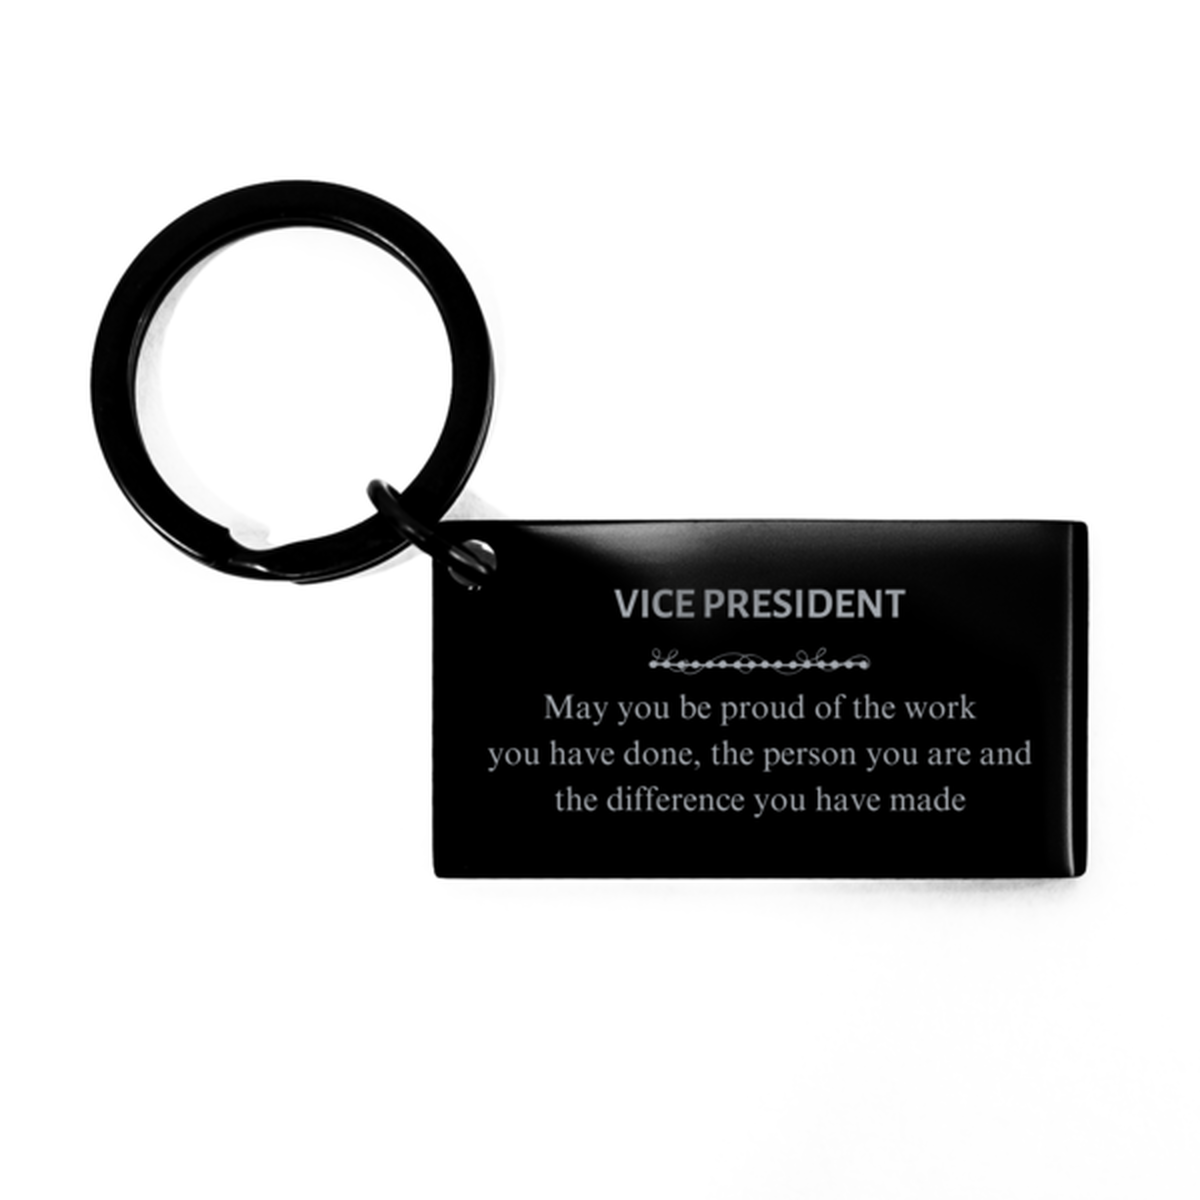 Ambulance Driver May you be proud of the work you have done, Retirement Vice President Keychain for Colleague Appreciation Gifts Amazing for Vice President